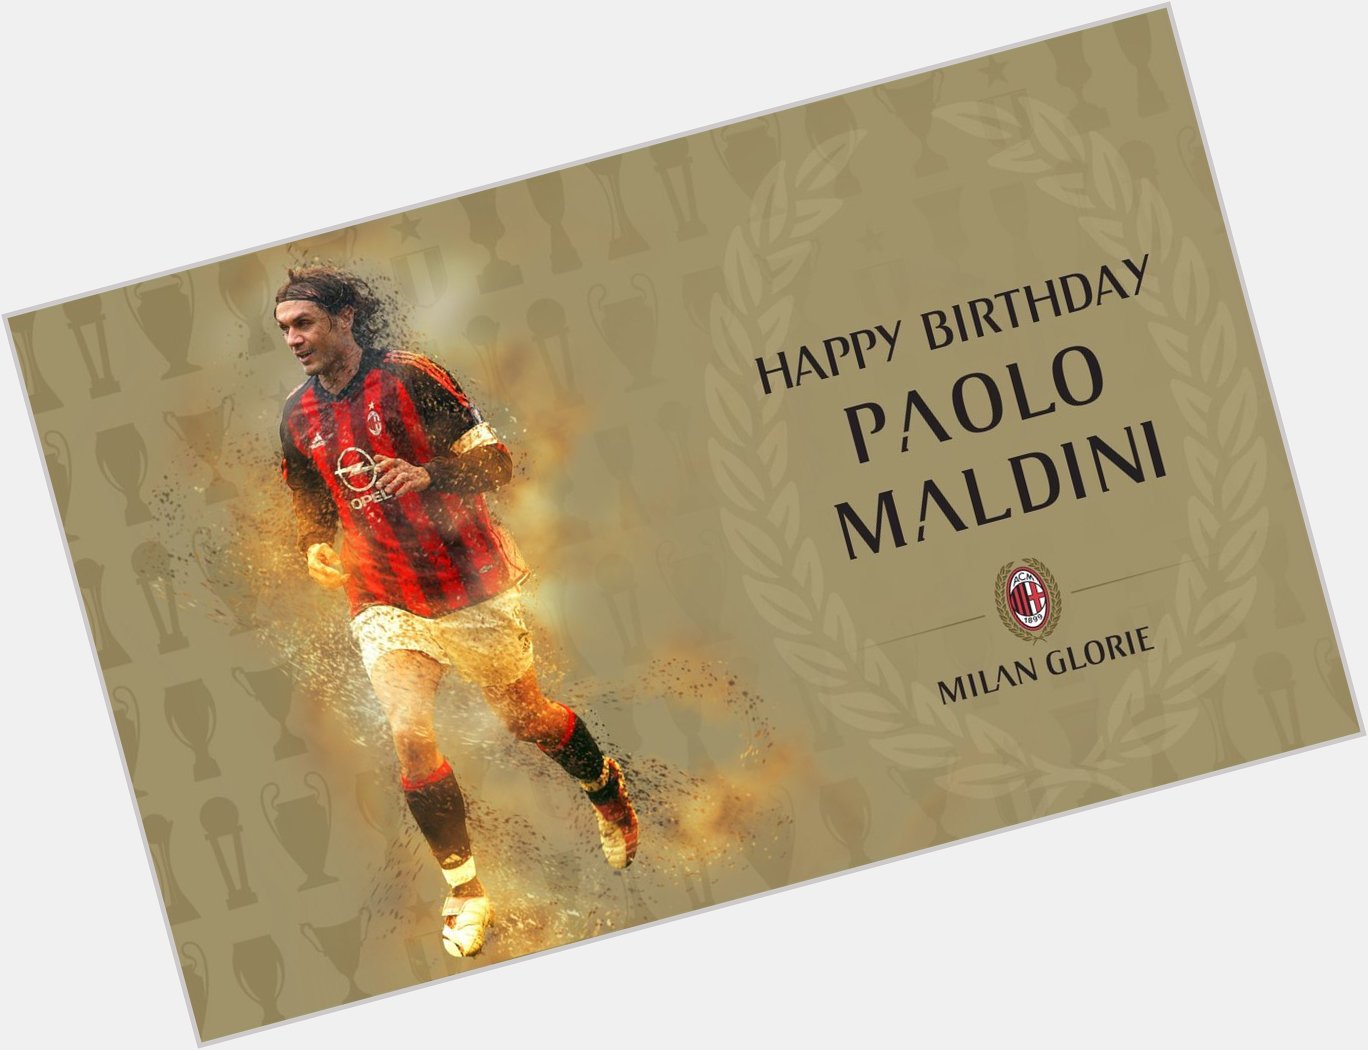 Happy birthday to my football idol and the best defender in history paolo maldini 